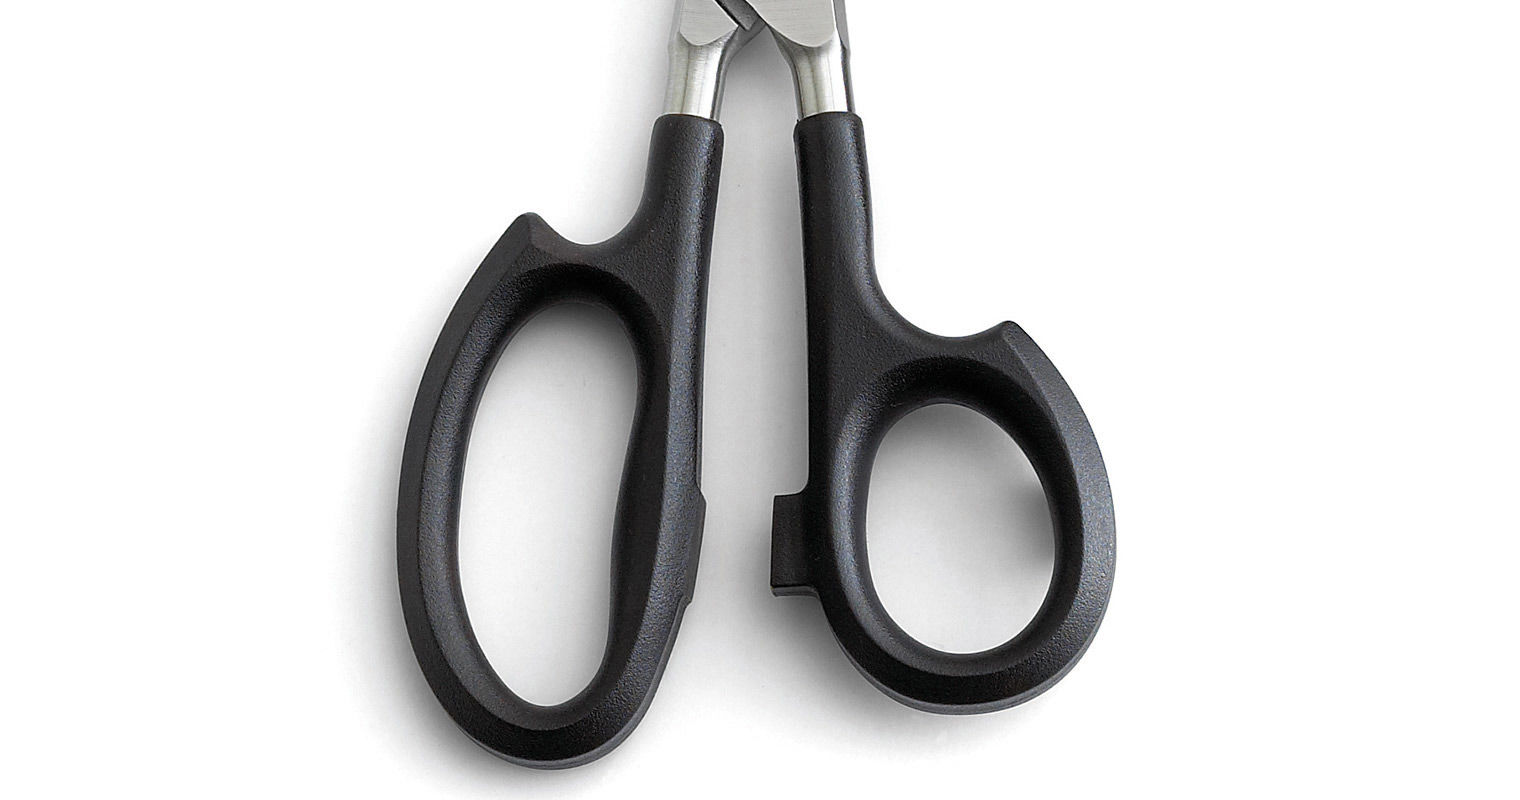 Super Shears – Retention Gifts